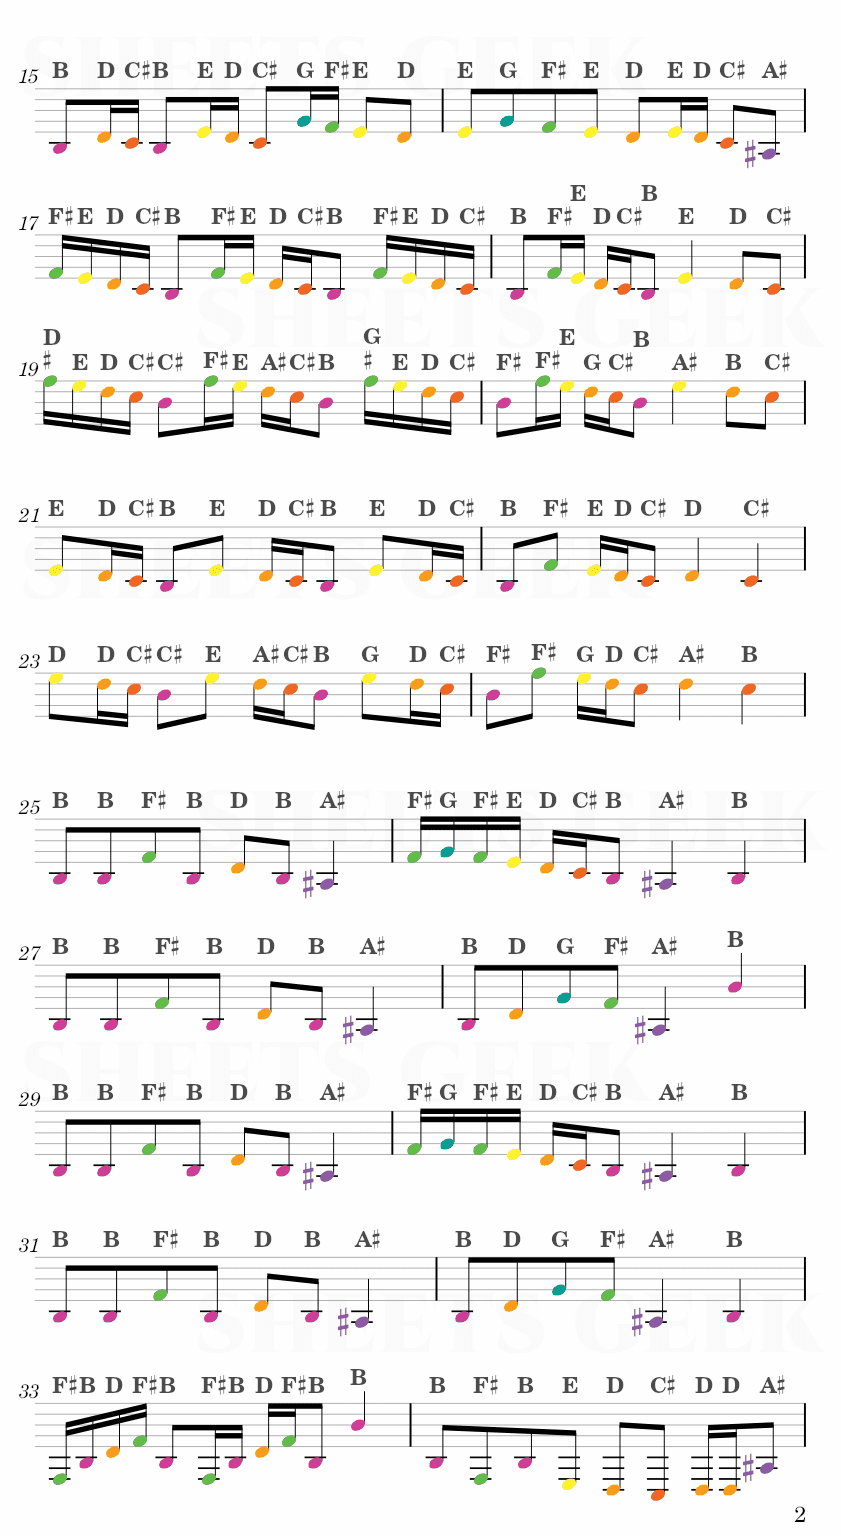 Ugh - Friday Night Funkin' Easy Sheet Music Free for piano, keyboard, flute, violin, sax, cello page 2